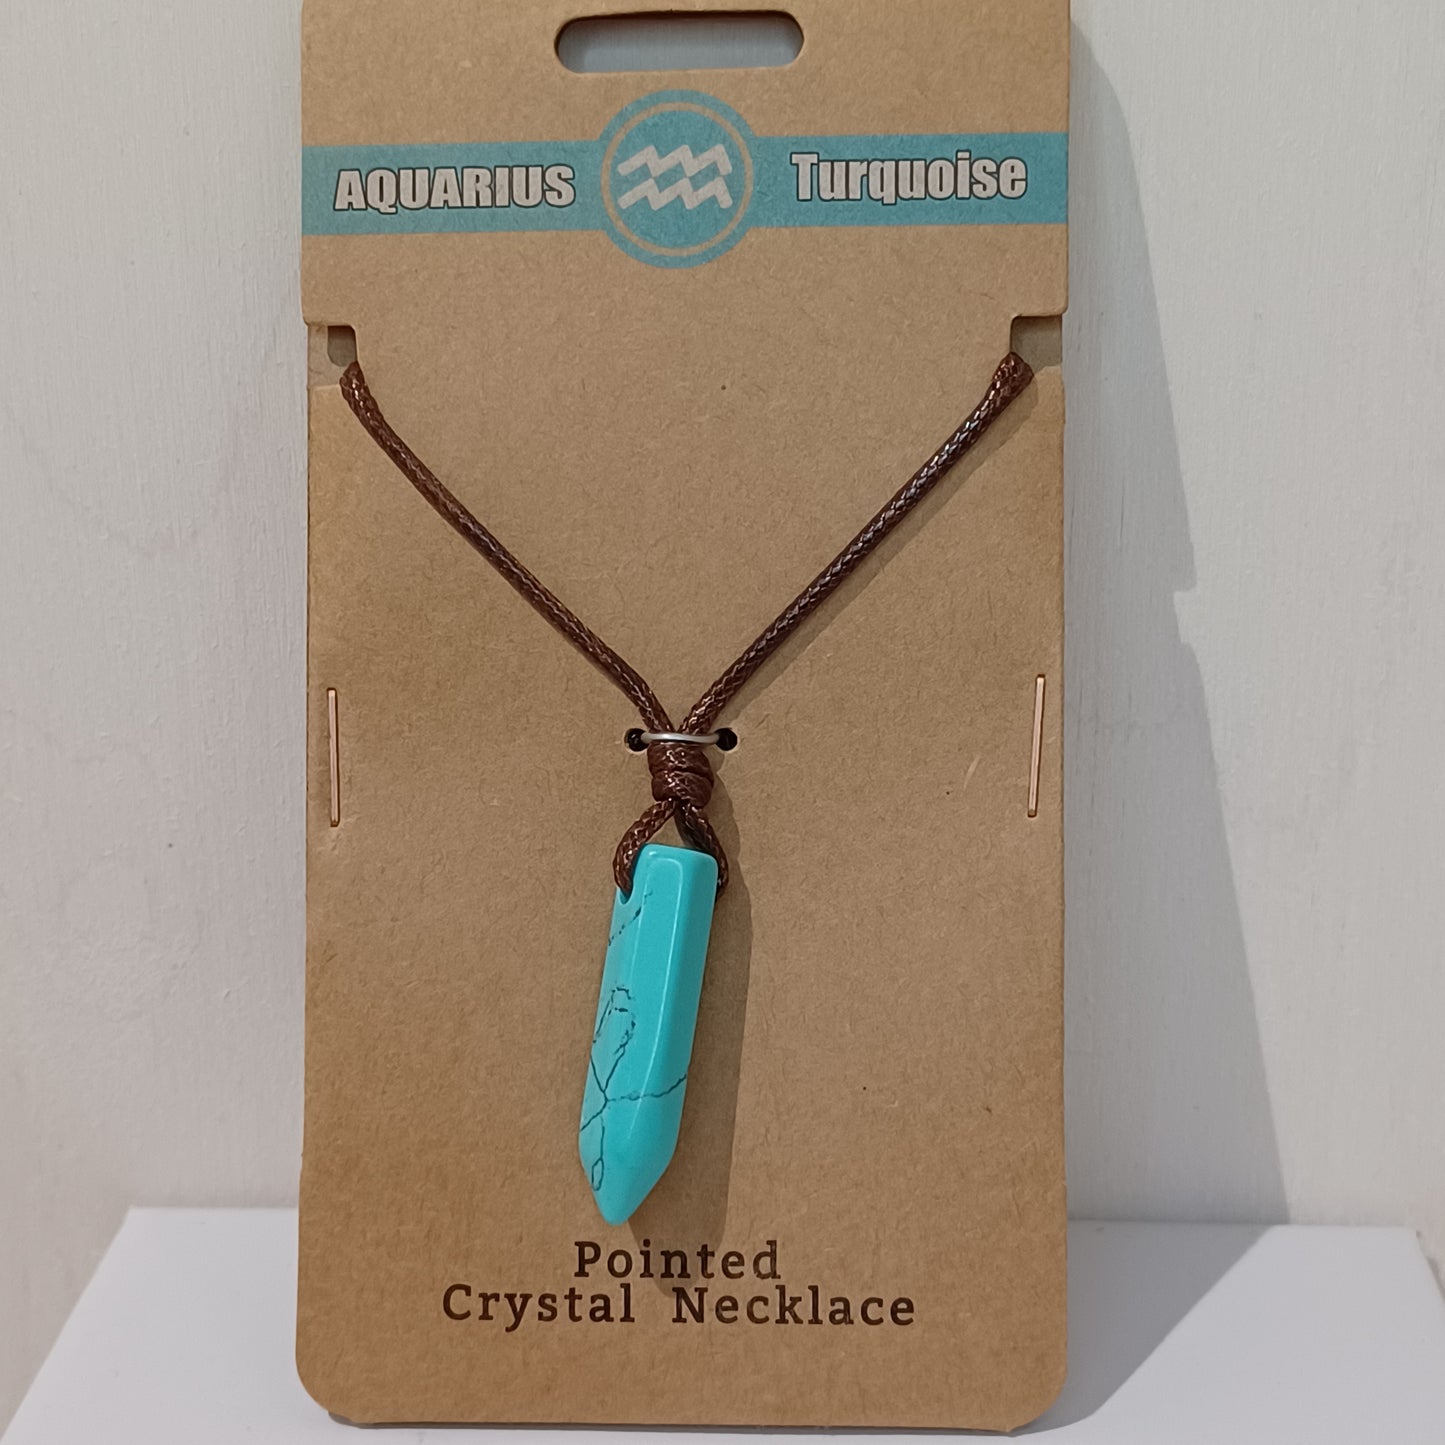 Pointed Crystal Necklace - Aquarius Turquoise